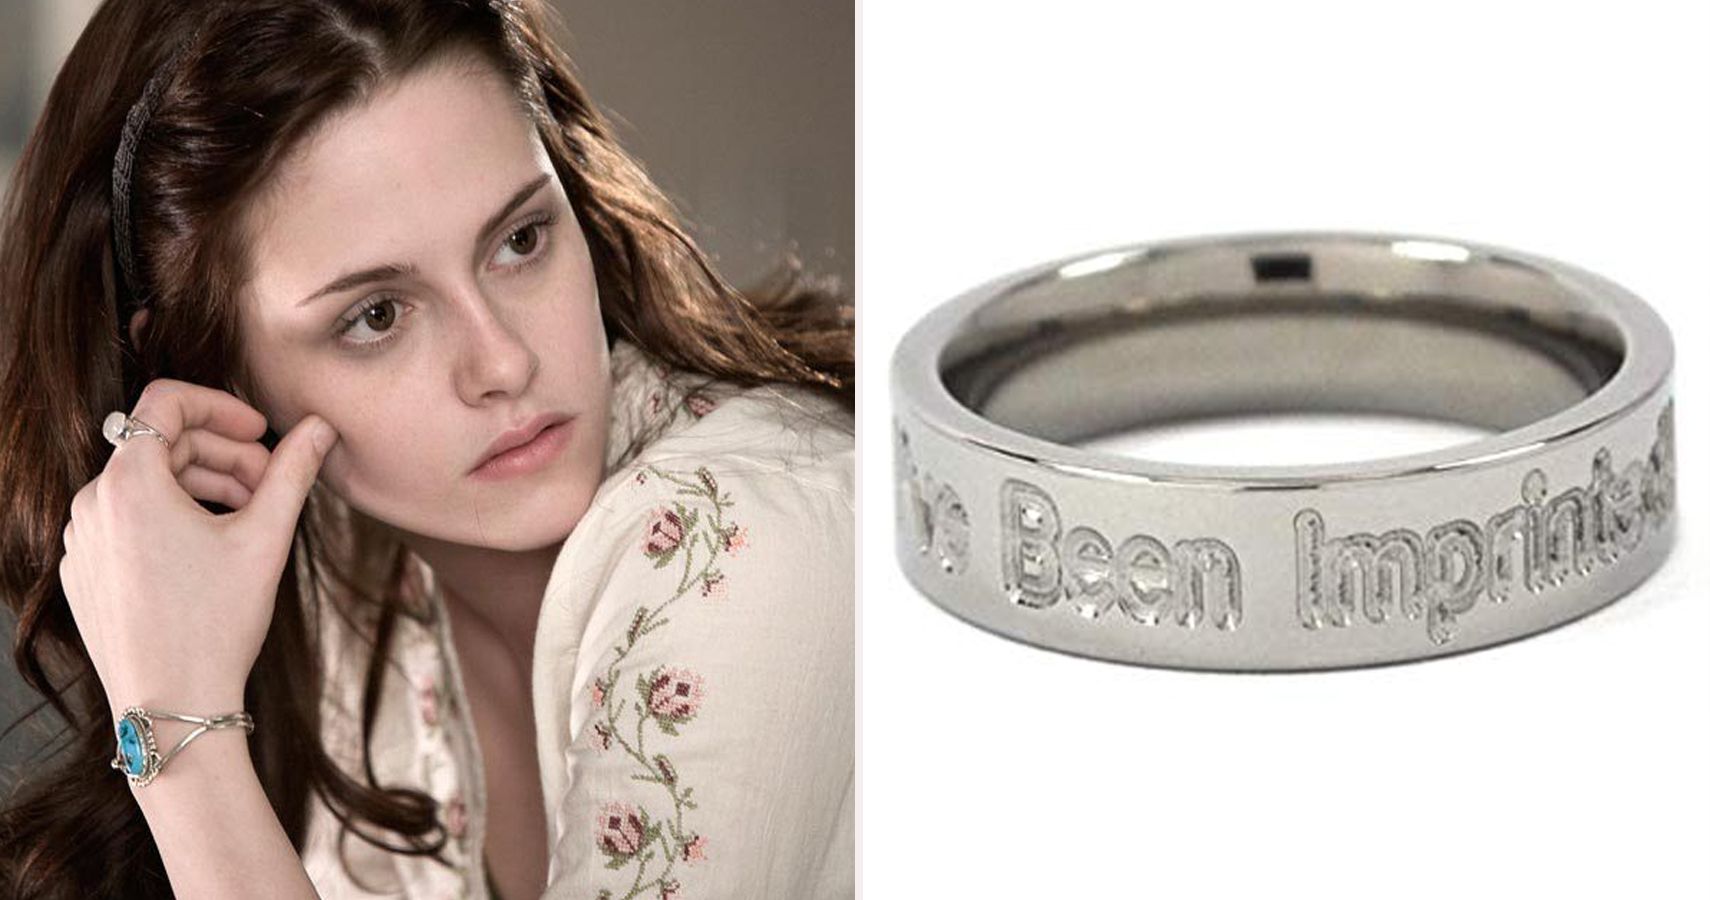 Twilight 19 Things Every Fanpire Needs To Own